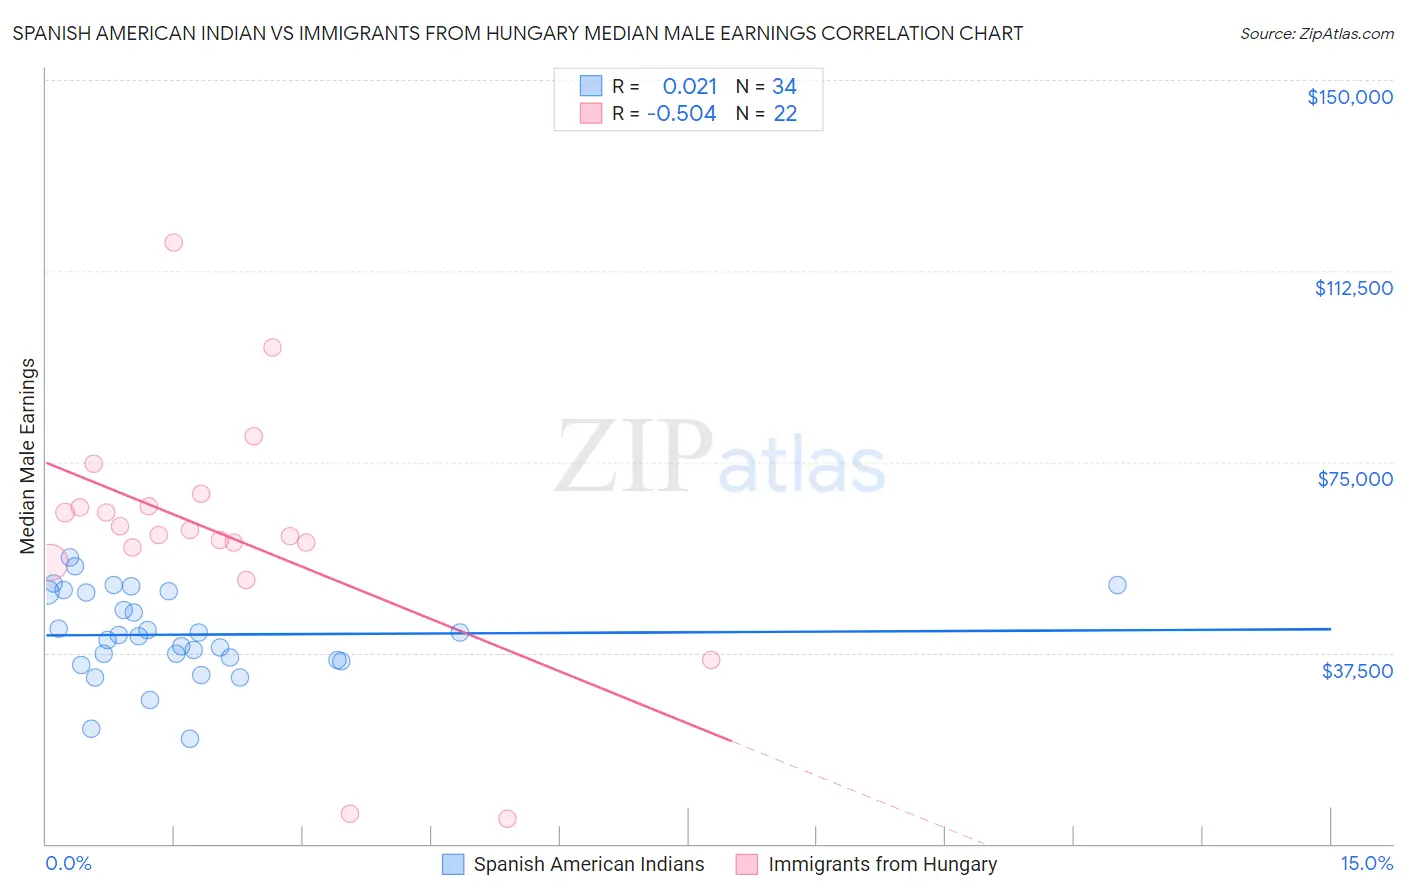 Spanish American Indian vs Immigrants from Hungary Median Male Earnings